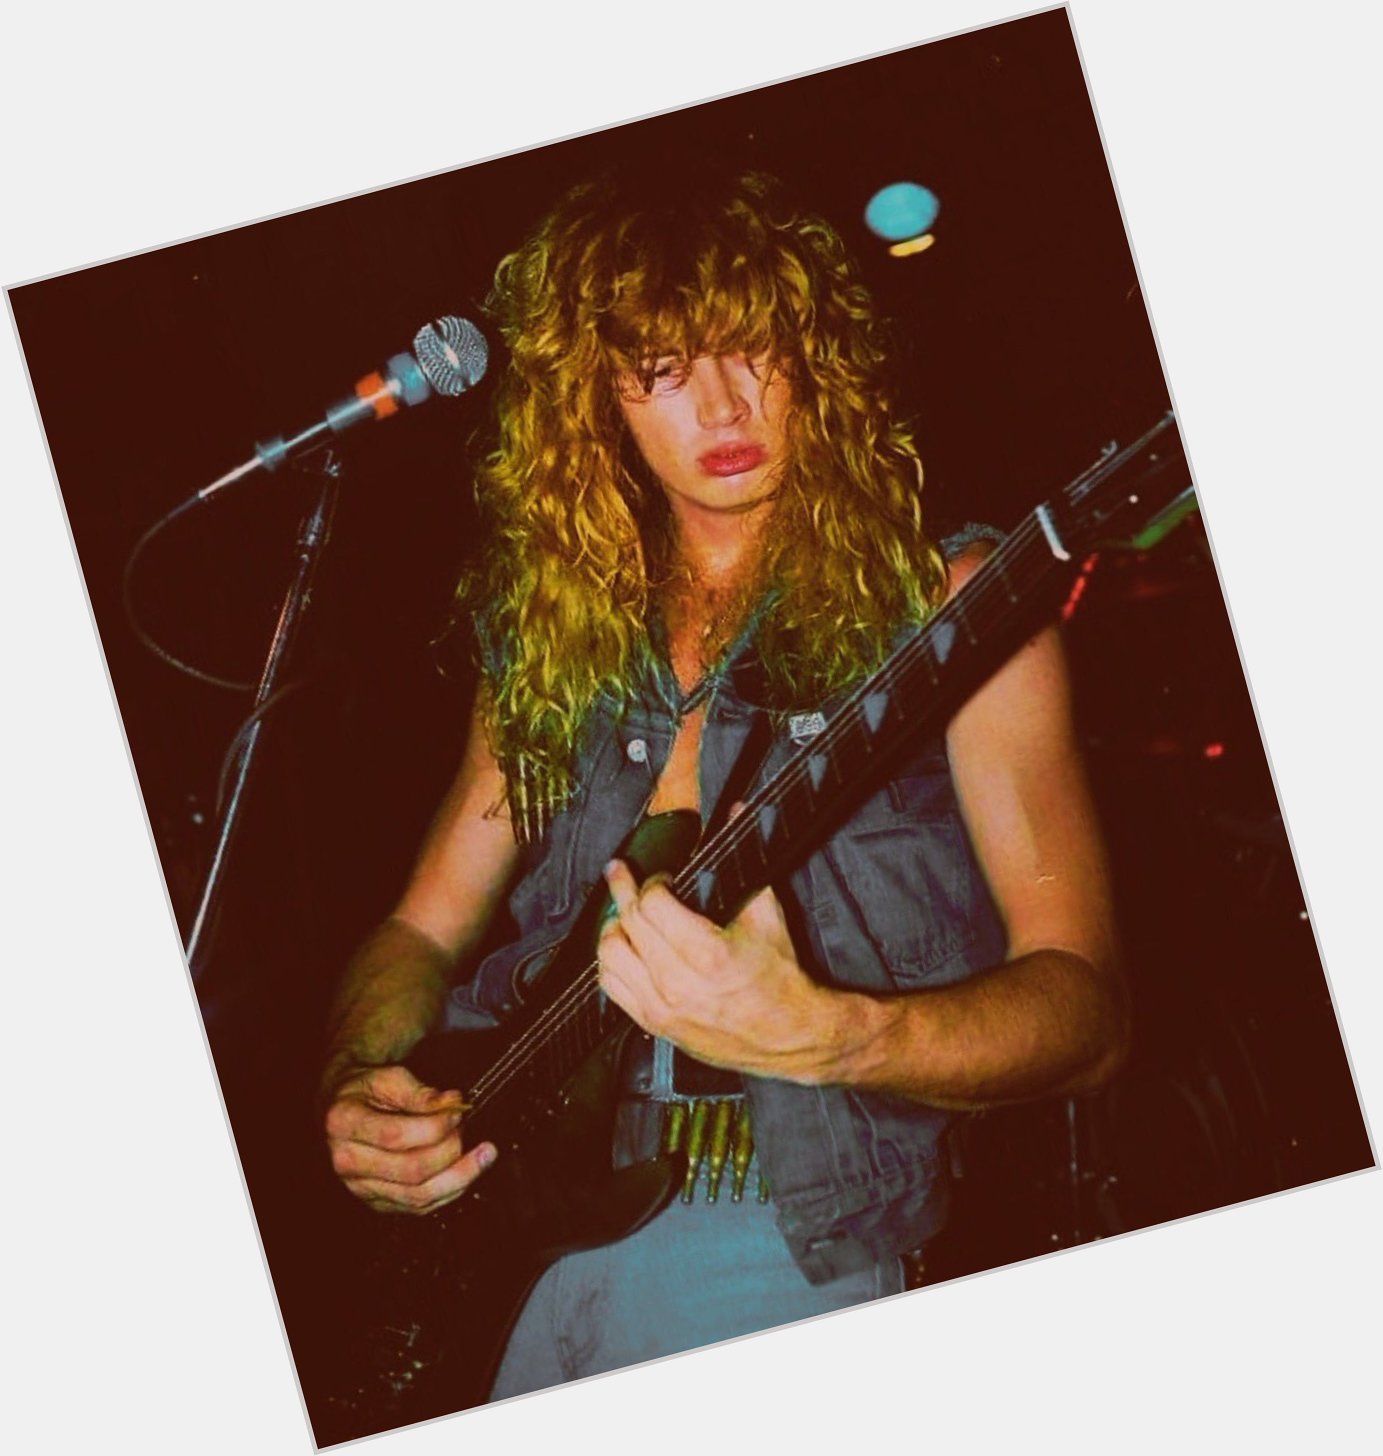 Happy birthday to dave mustaine. thank you for many years of great tunes <3 